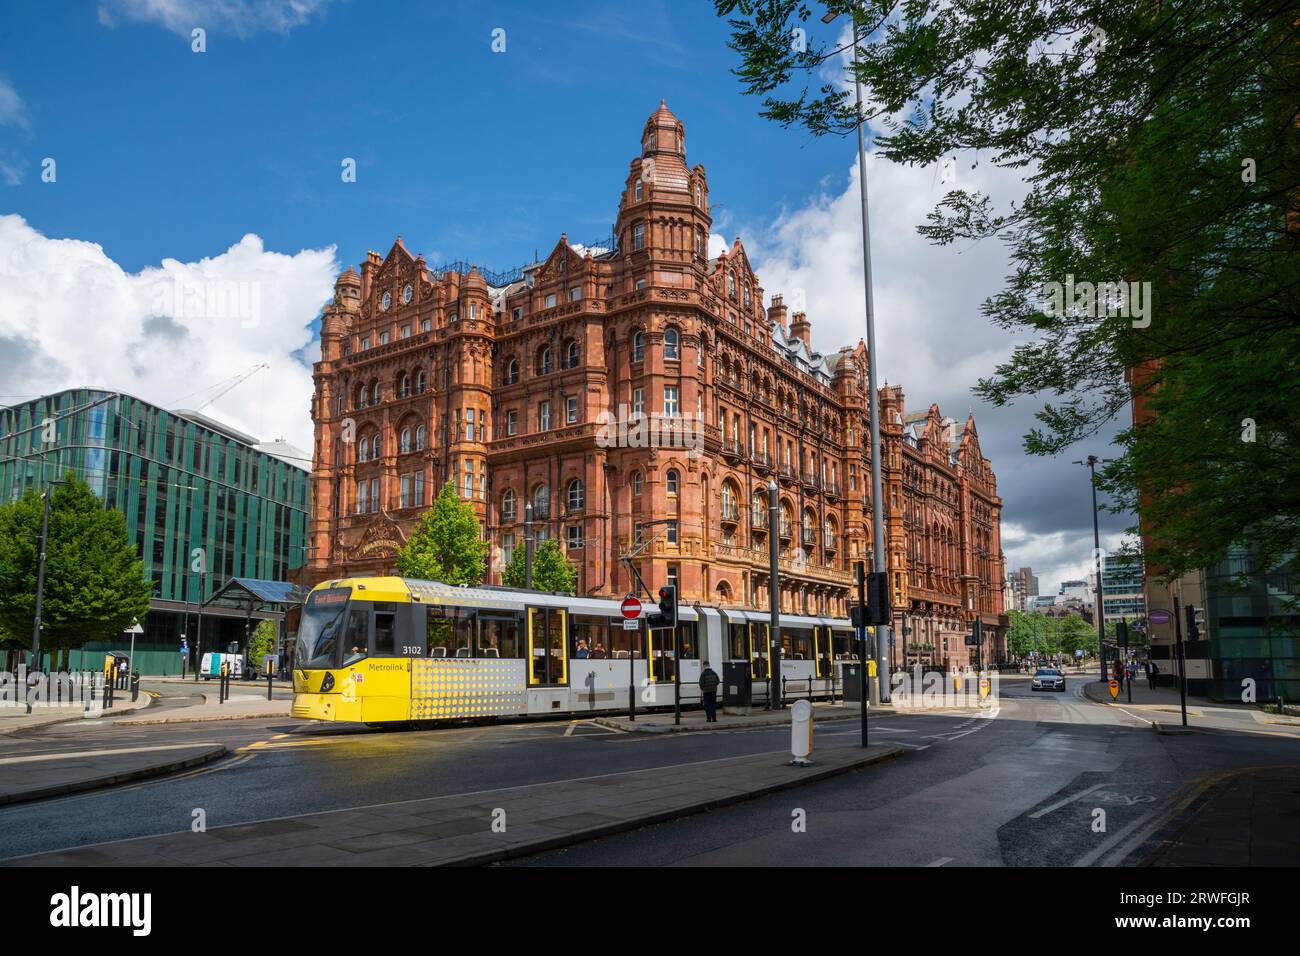 Metrolink tram in front of the Midland Hotel on Lower Mosley Street, Manchester, Northwest England. Stock Photo